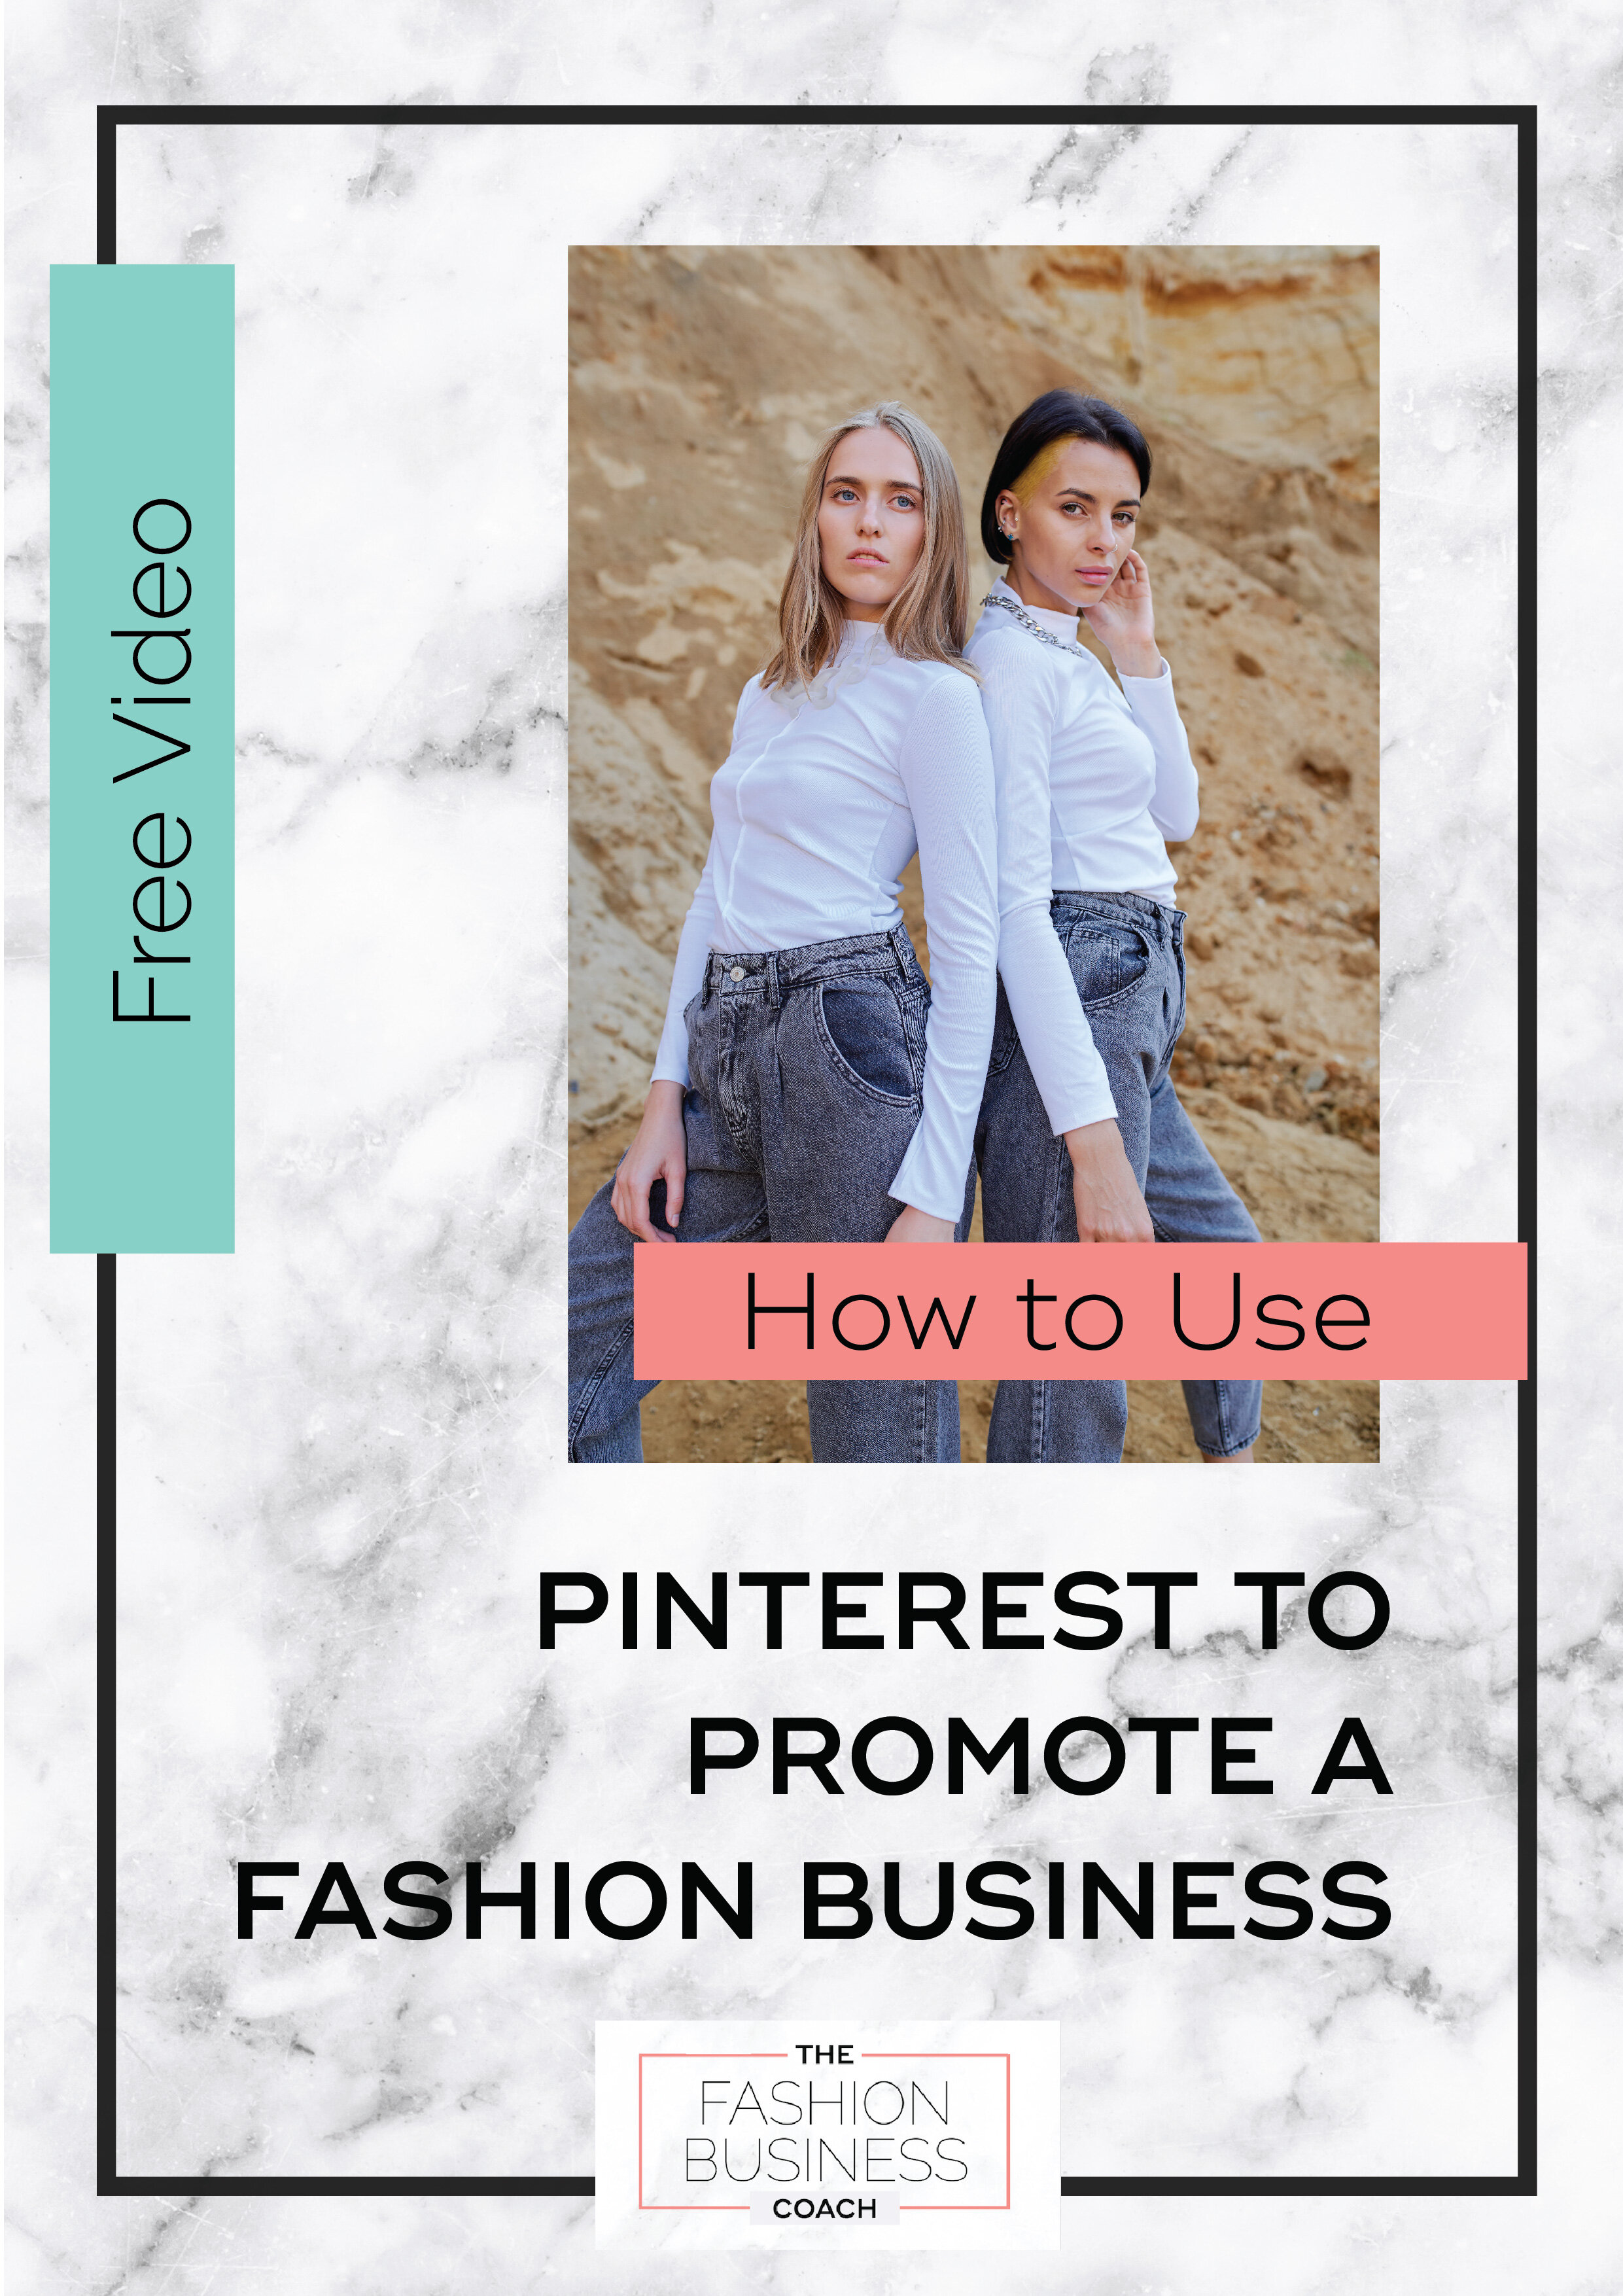 How to use Pinterest to Promote a Fashion Business1.jpg